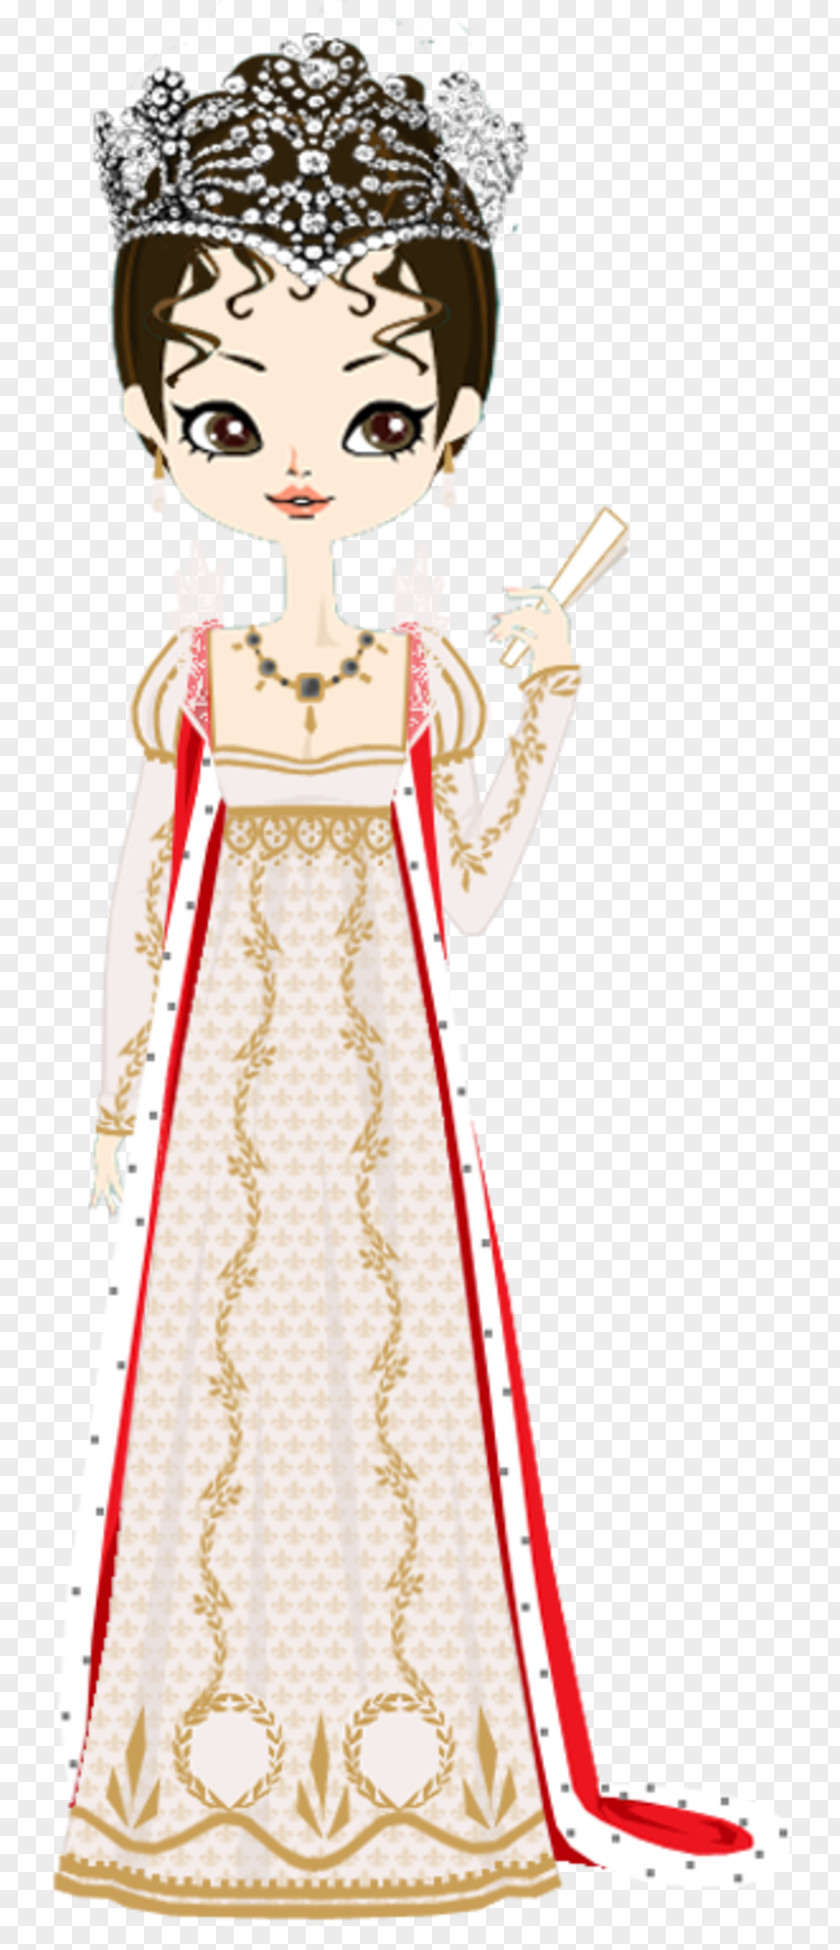 Doll House DeviantArt Illustration Gown Woman PNG